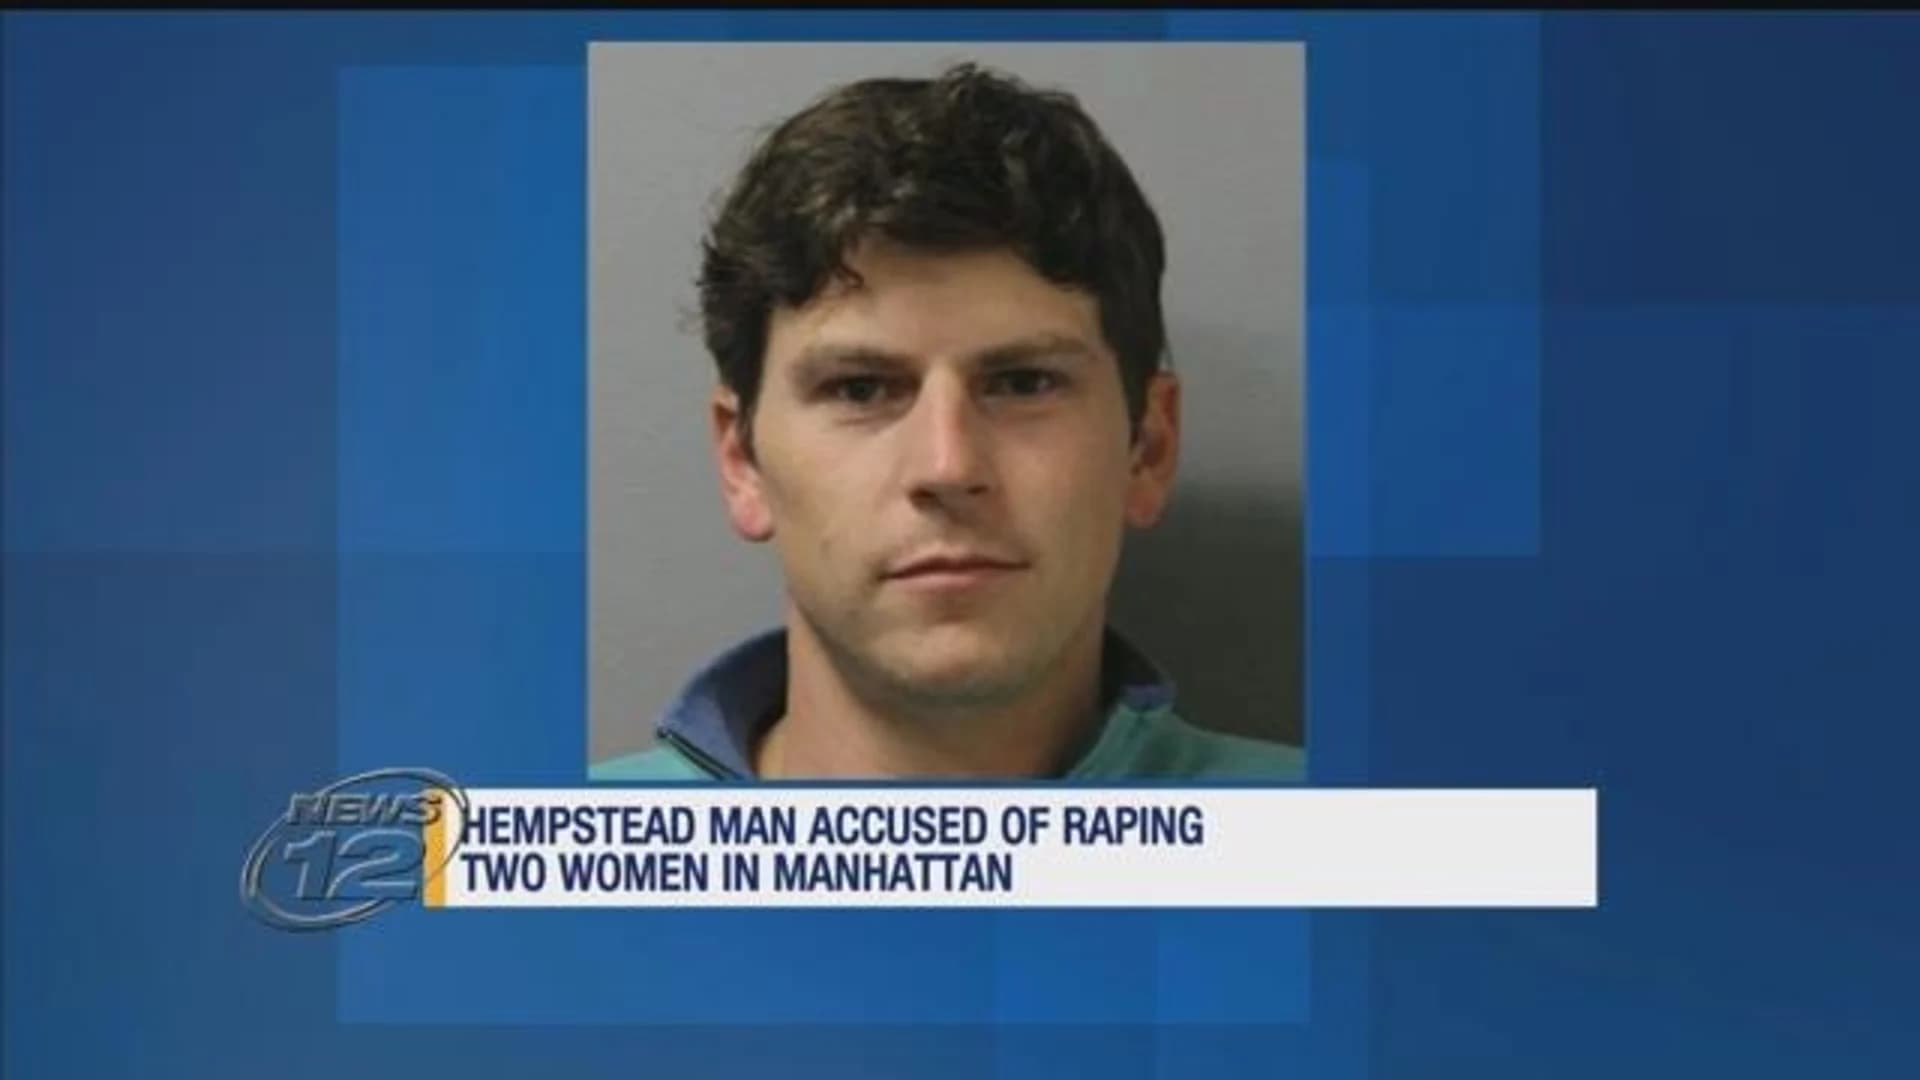 Hempstead man to face rape charges in Manhattan